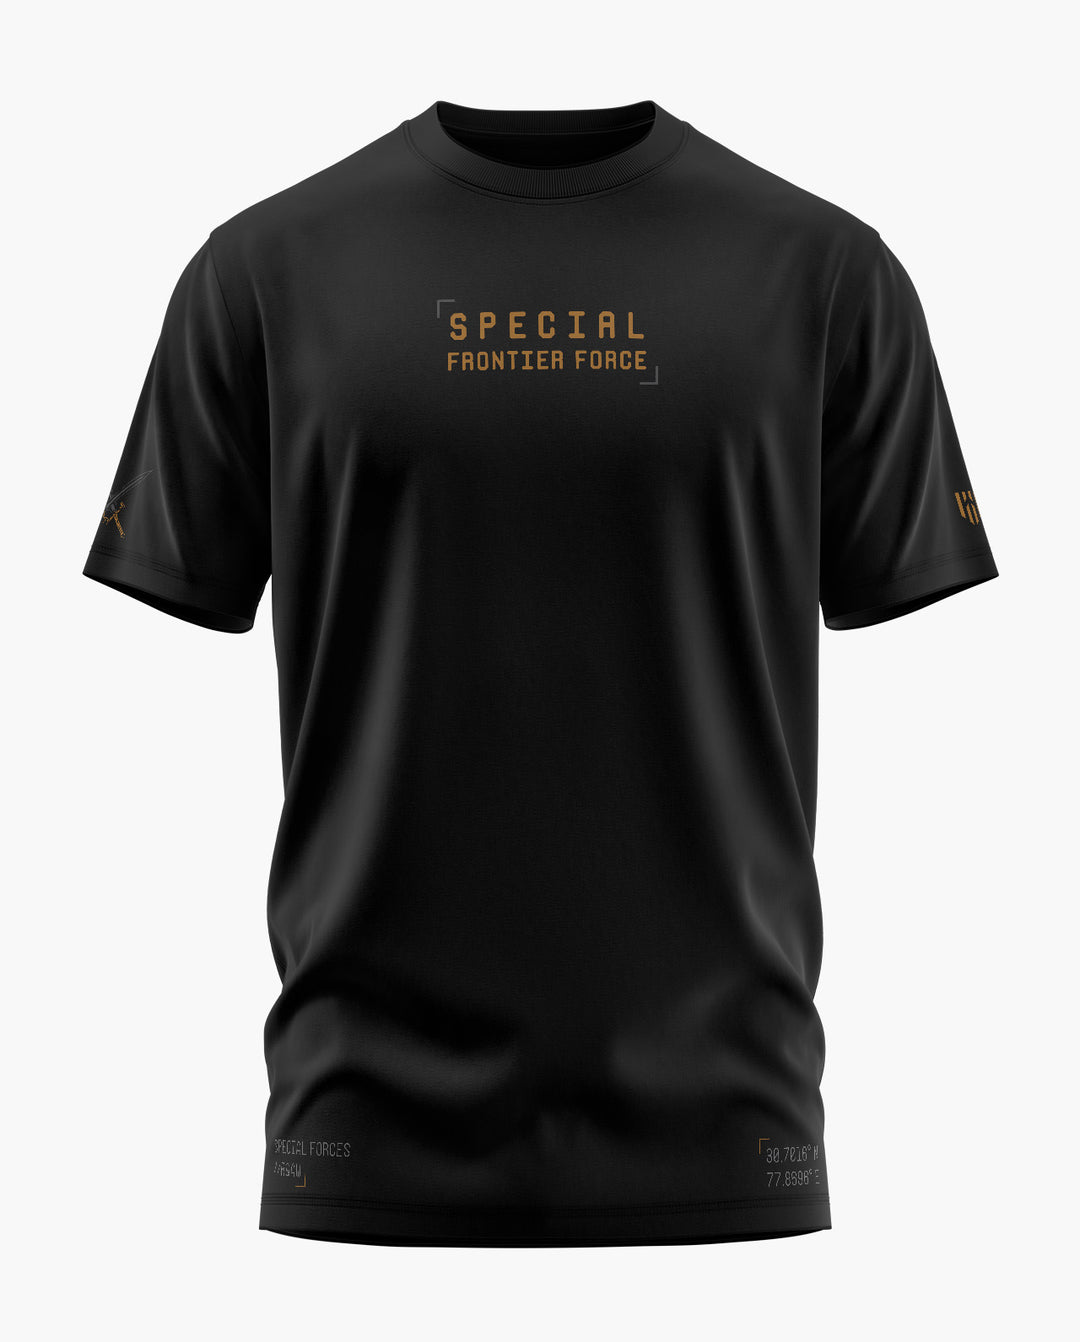 SPECIAL FRONTIER FORCE(SFF) T-Shirt - Aero Armour